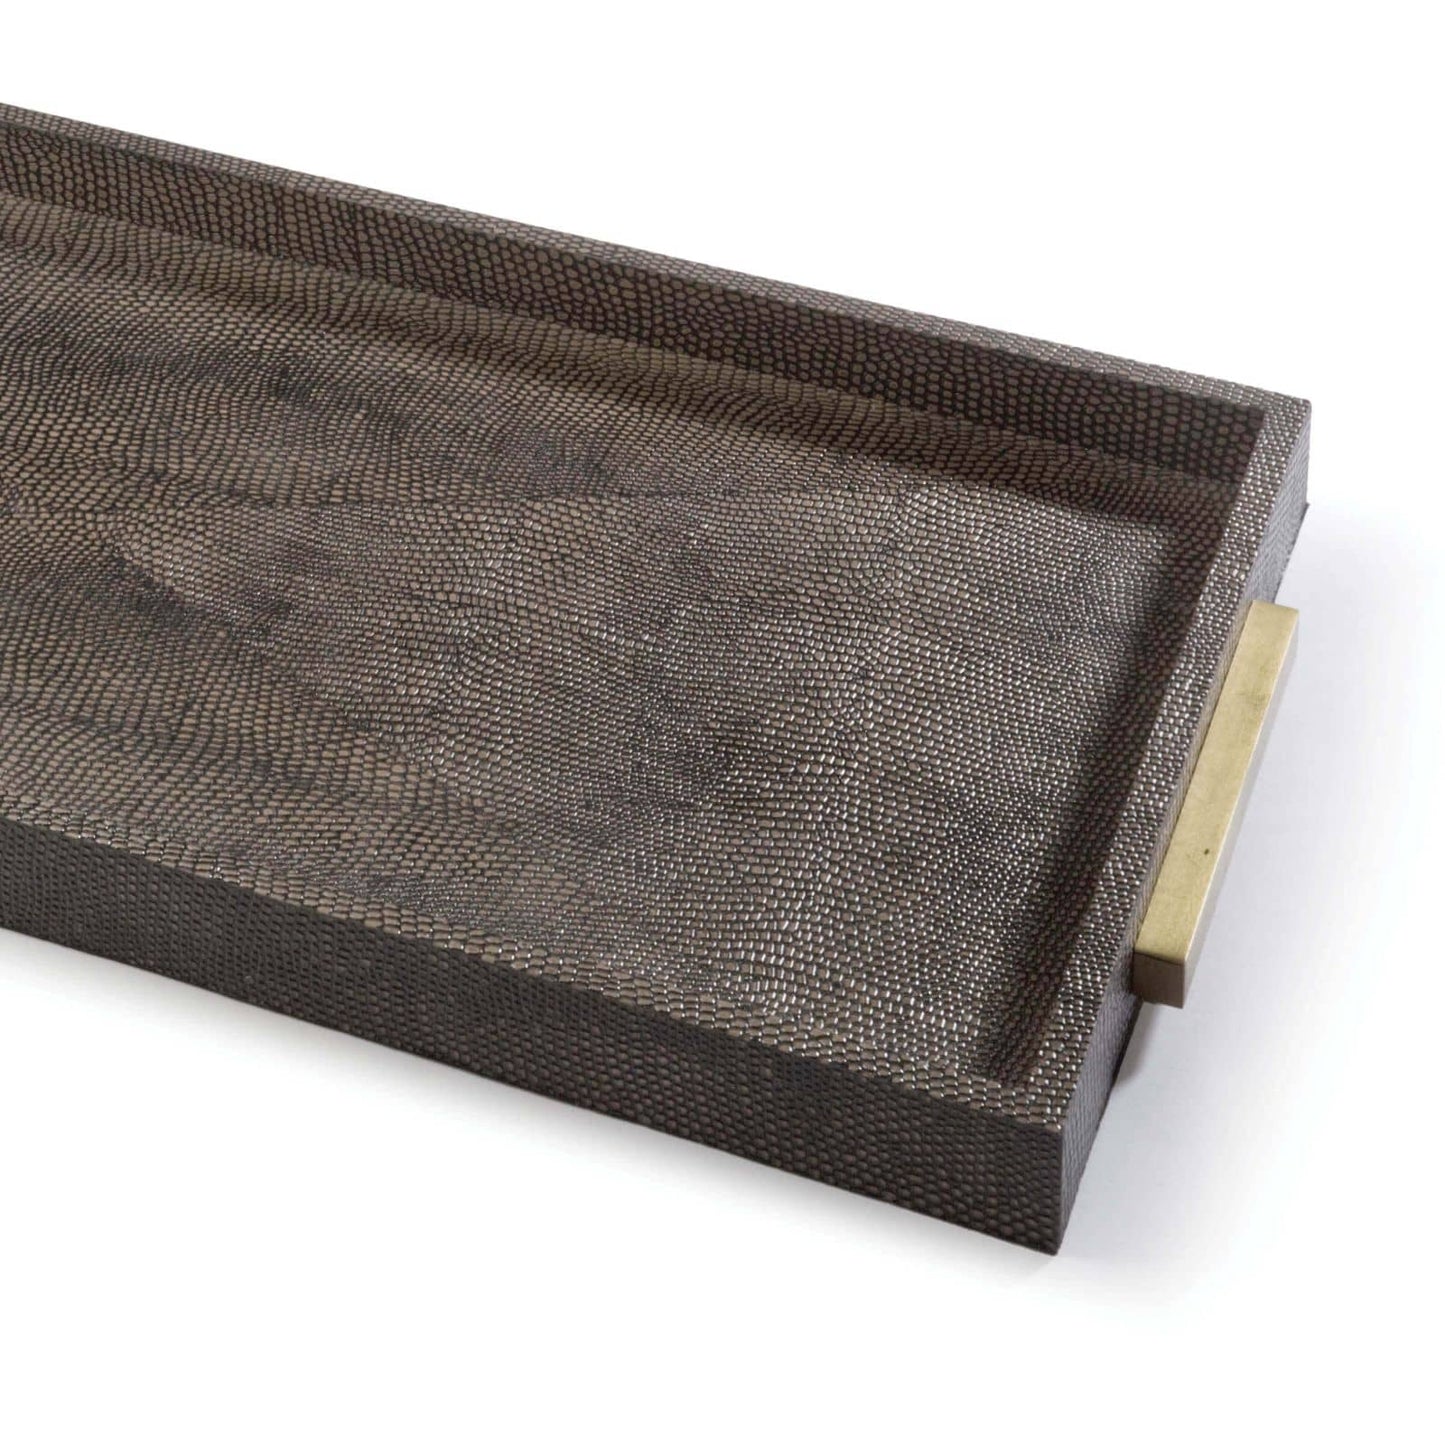 Rectangle Shagreen Boutique Tray in Vintage Brown Snake by Regina Andrew